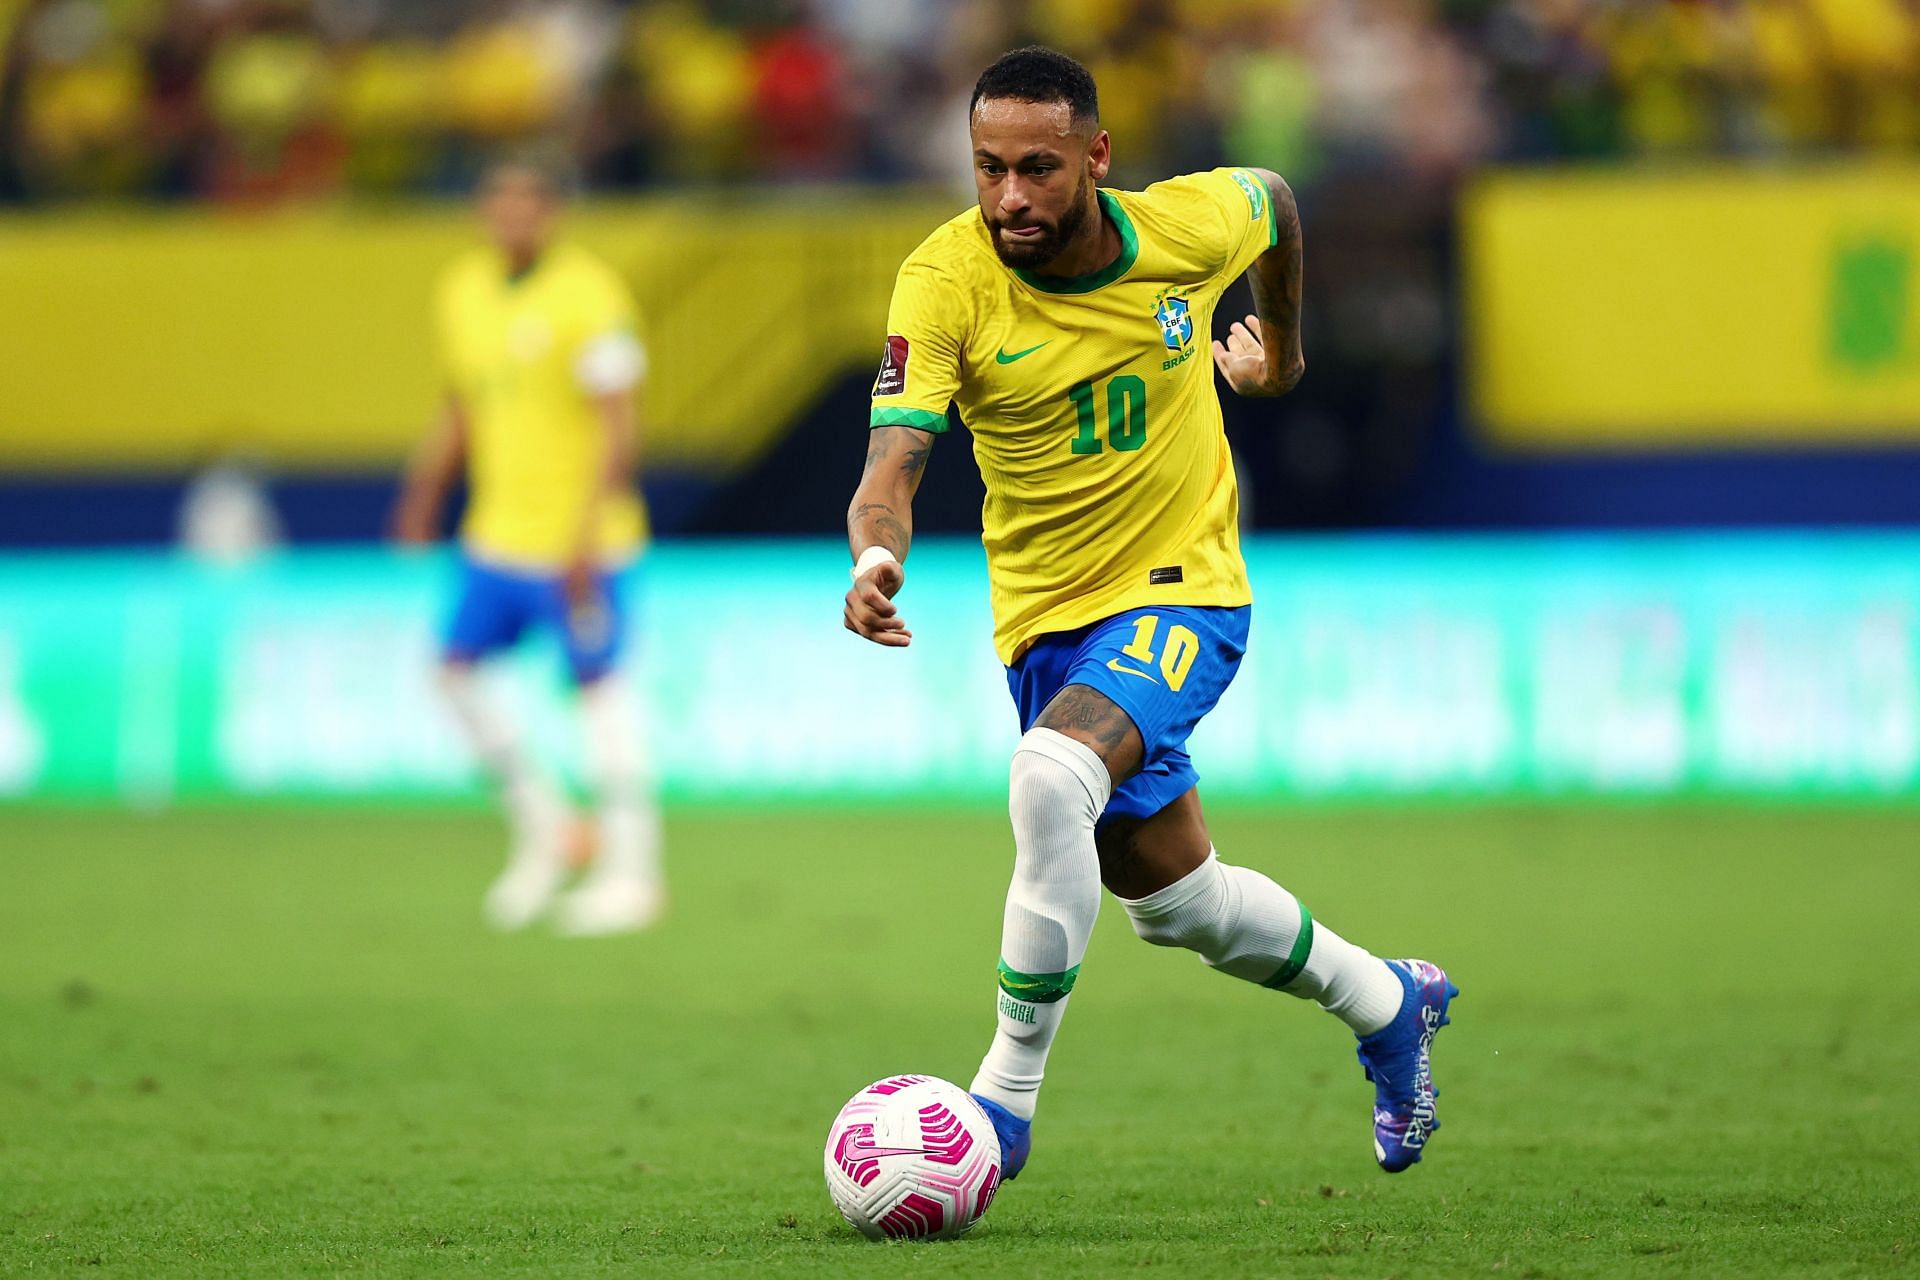 Neymar has been performing quite well at the WC qualifiers (Image via Getty)